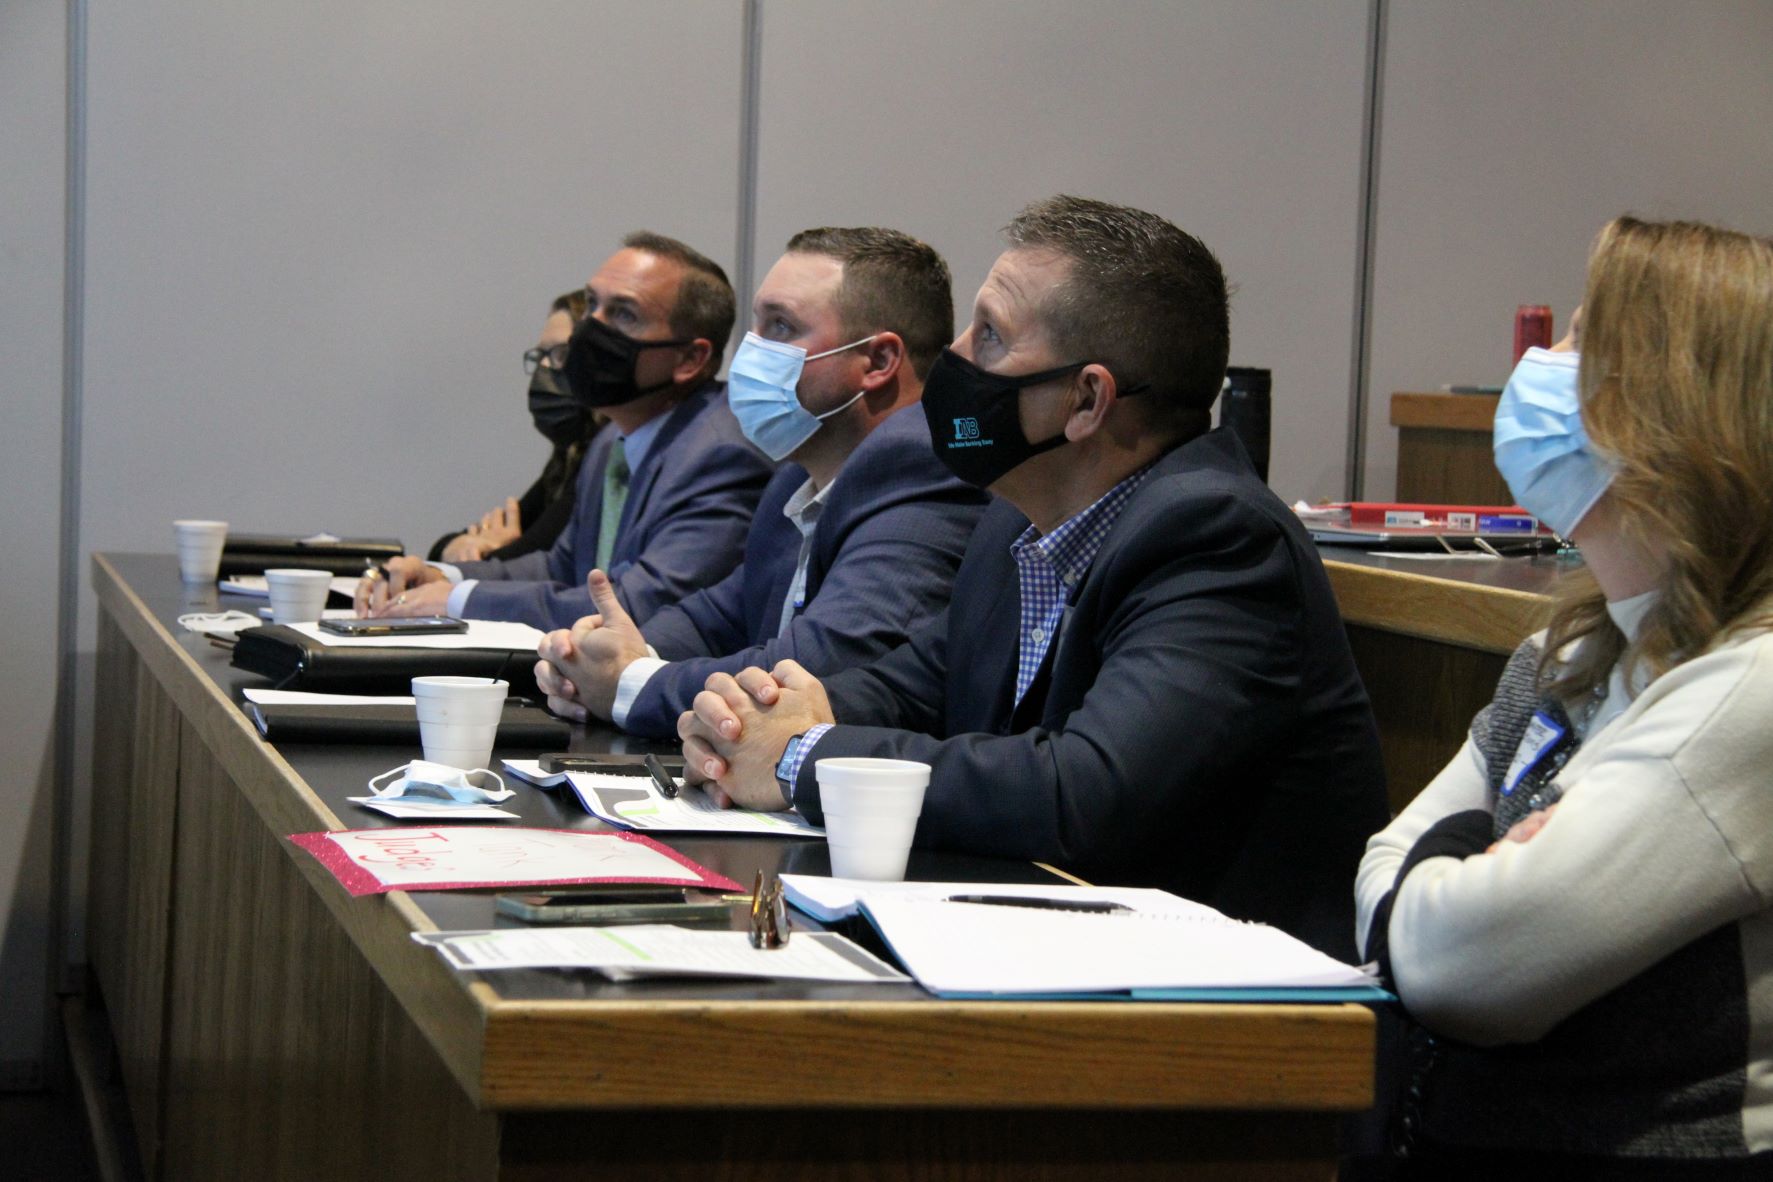 Five local business leaders in a Shark Tank exercise